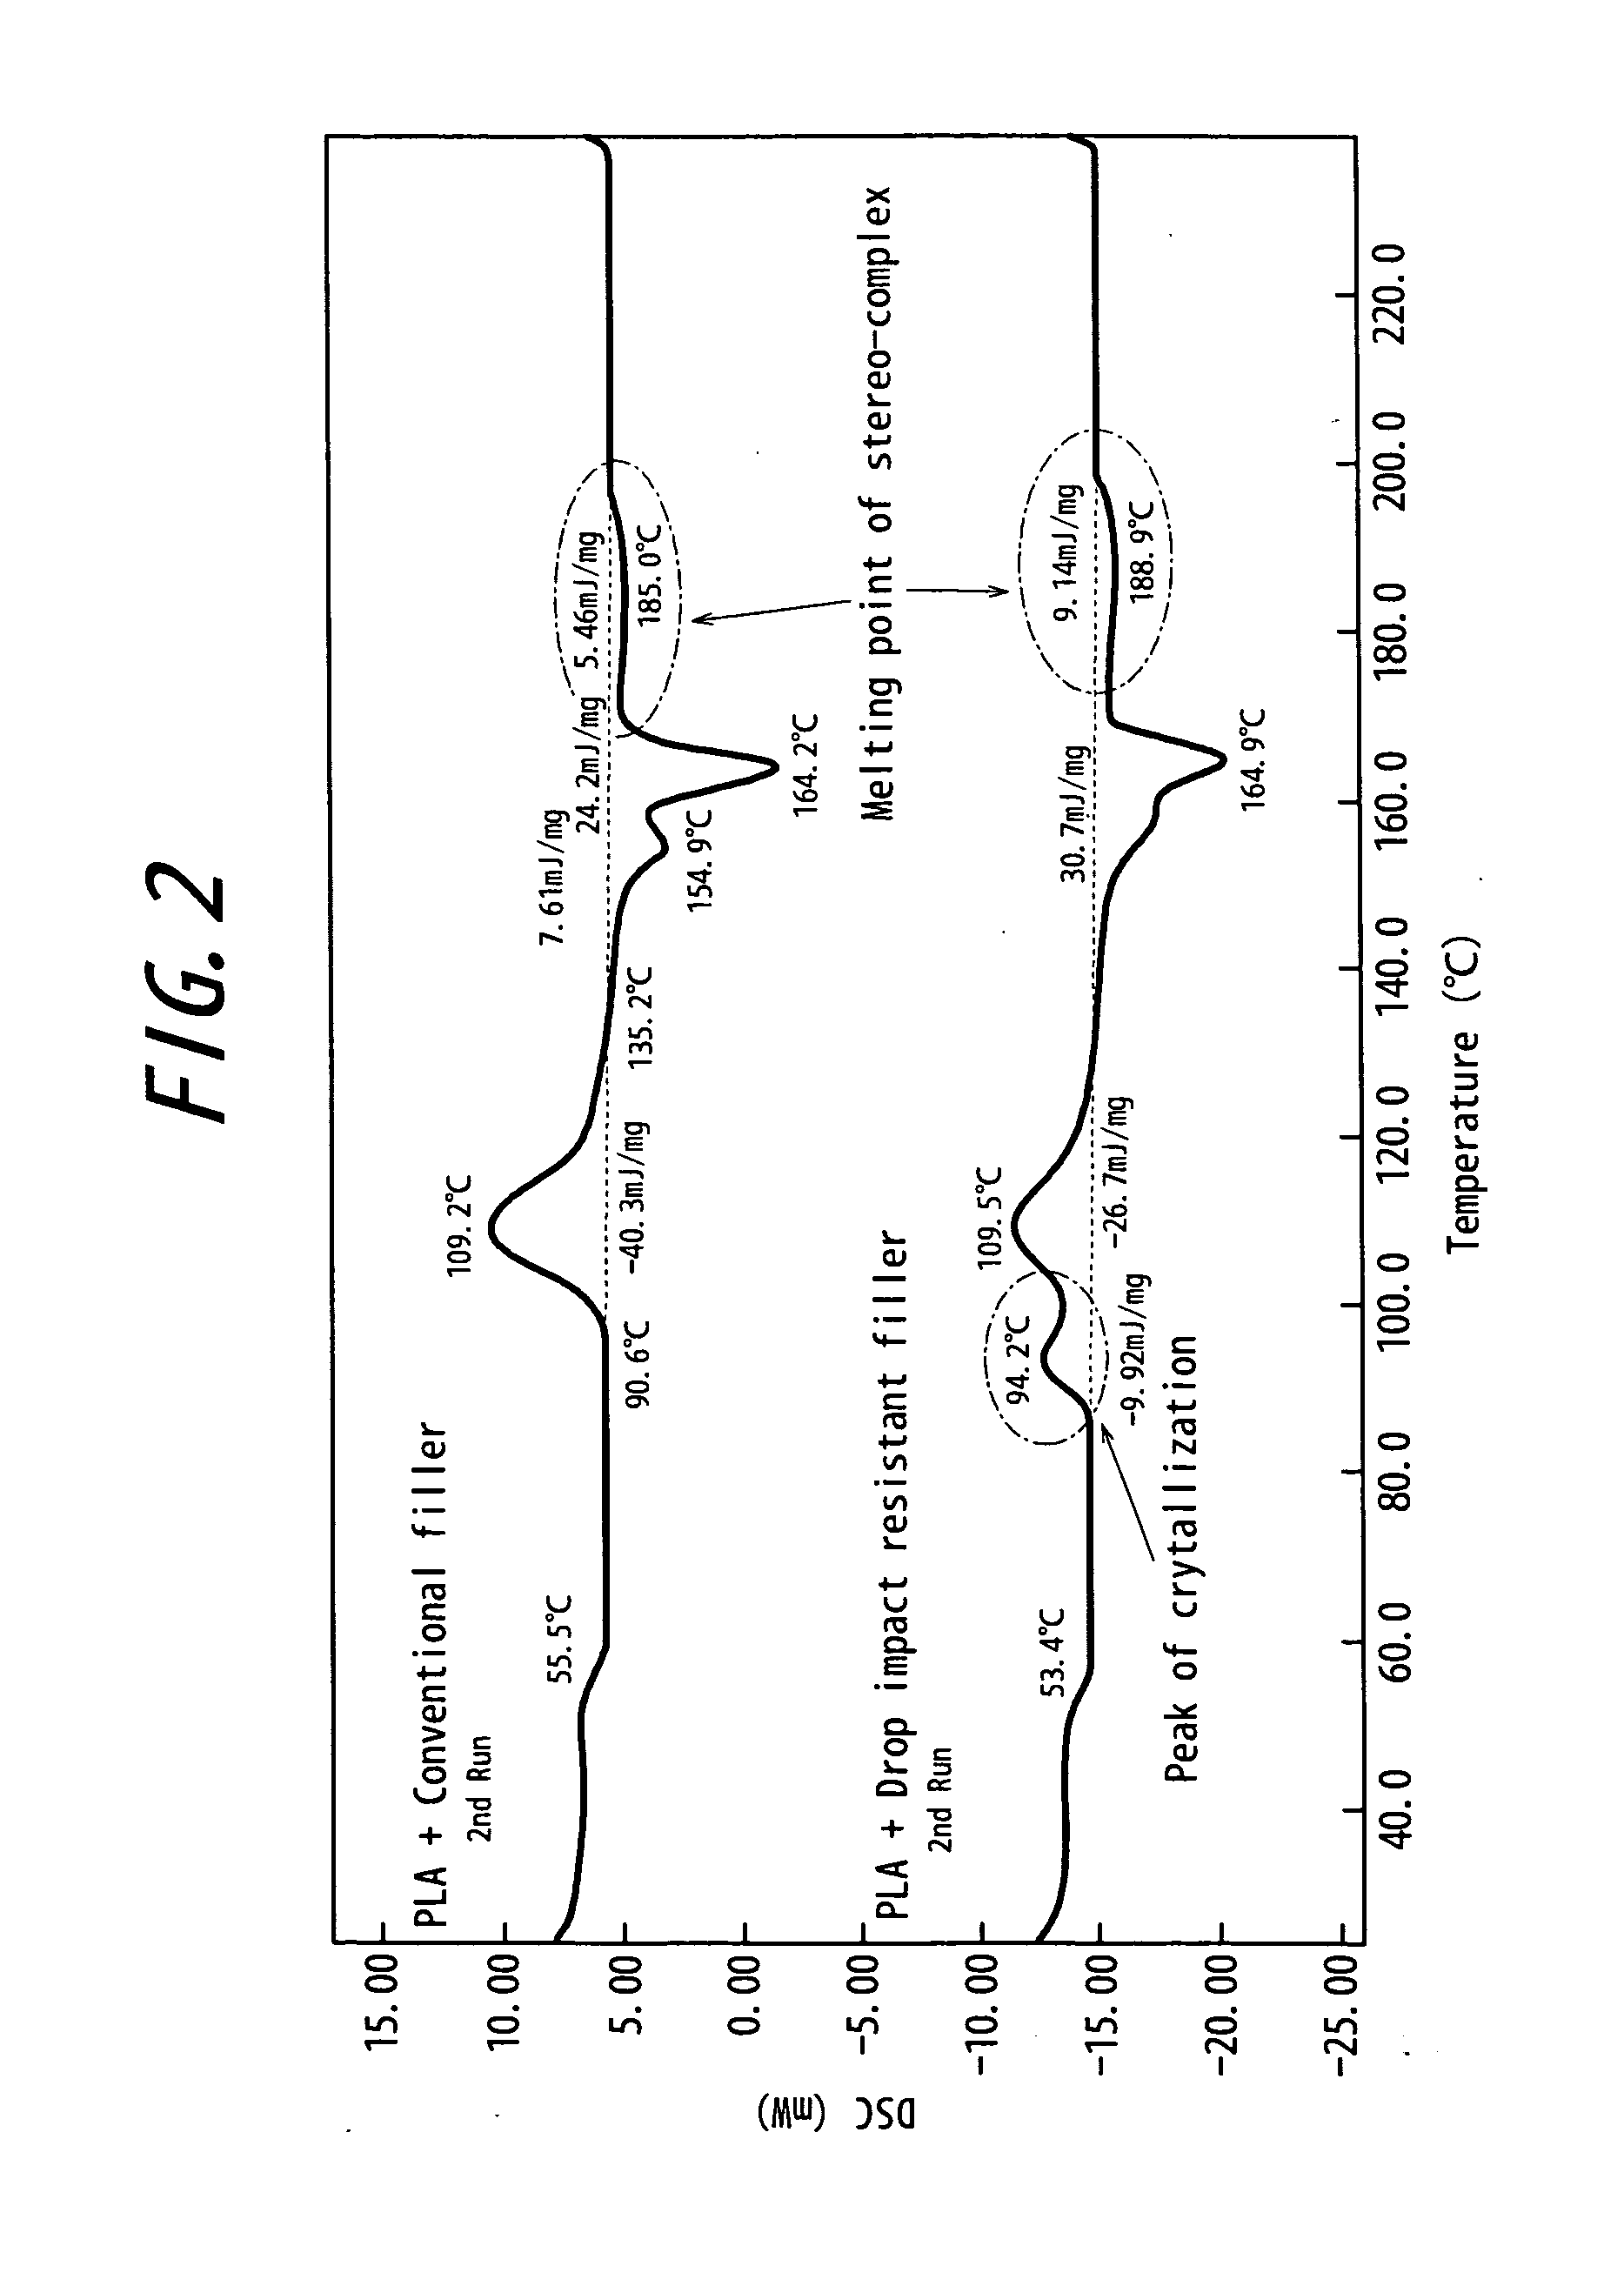 Molded article having heat resistance and impact resistance